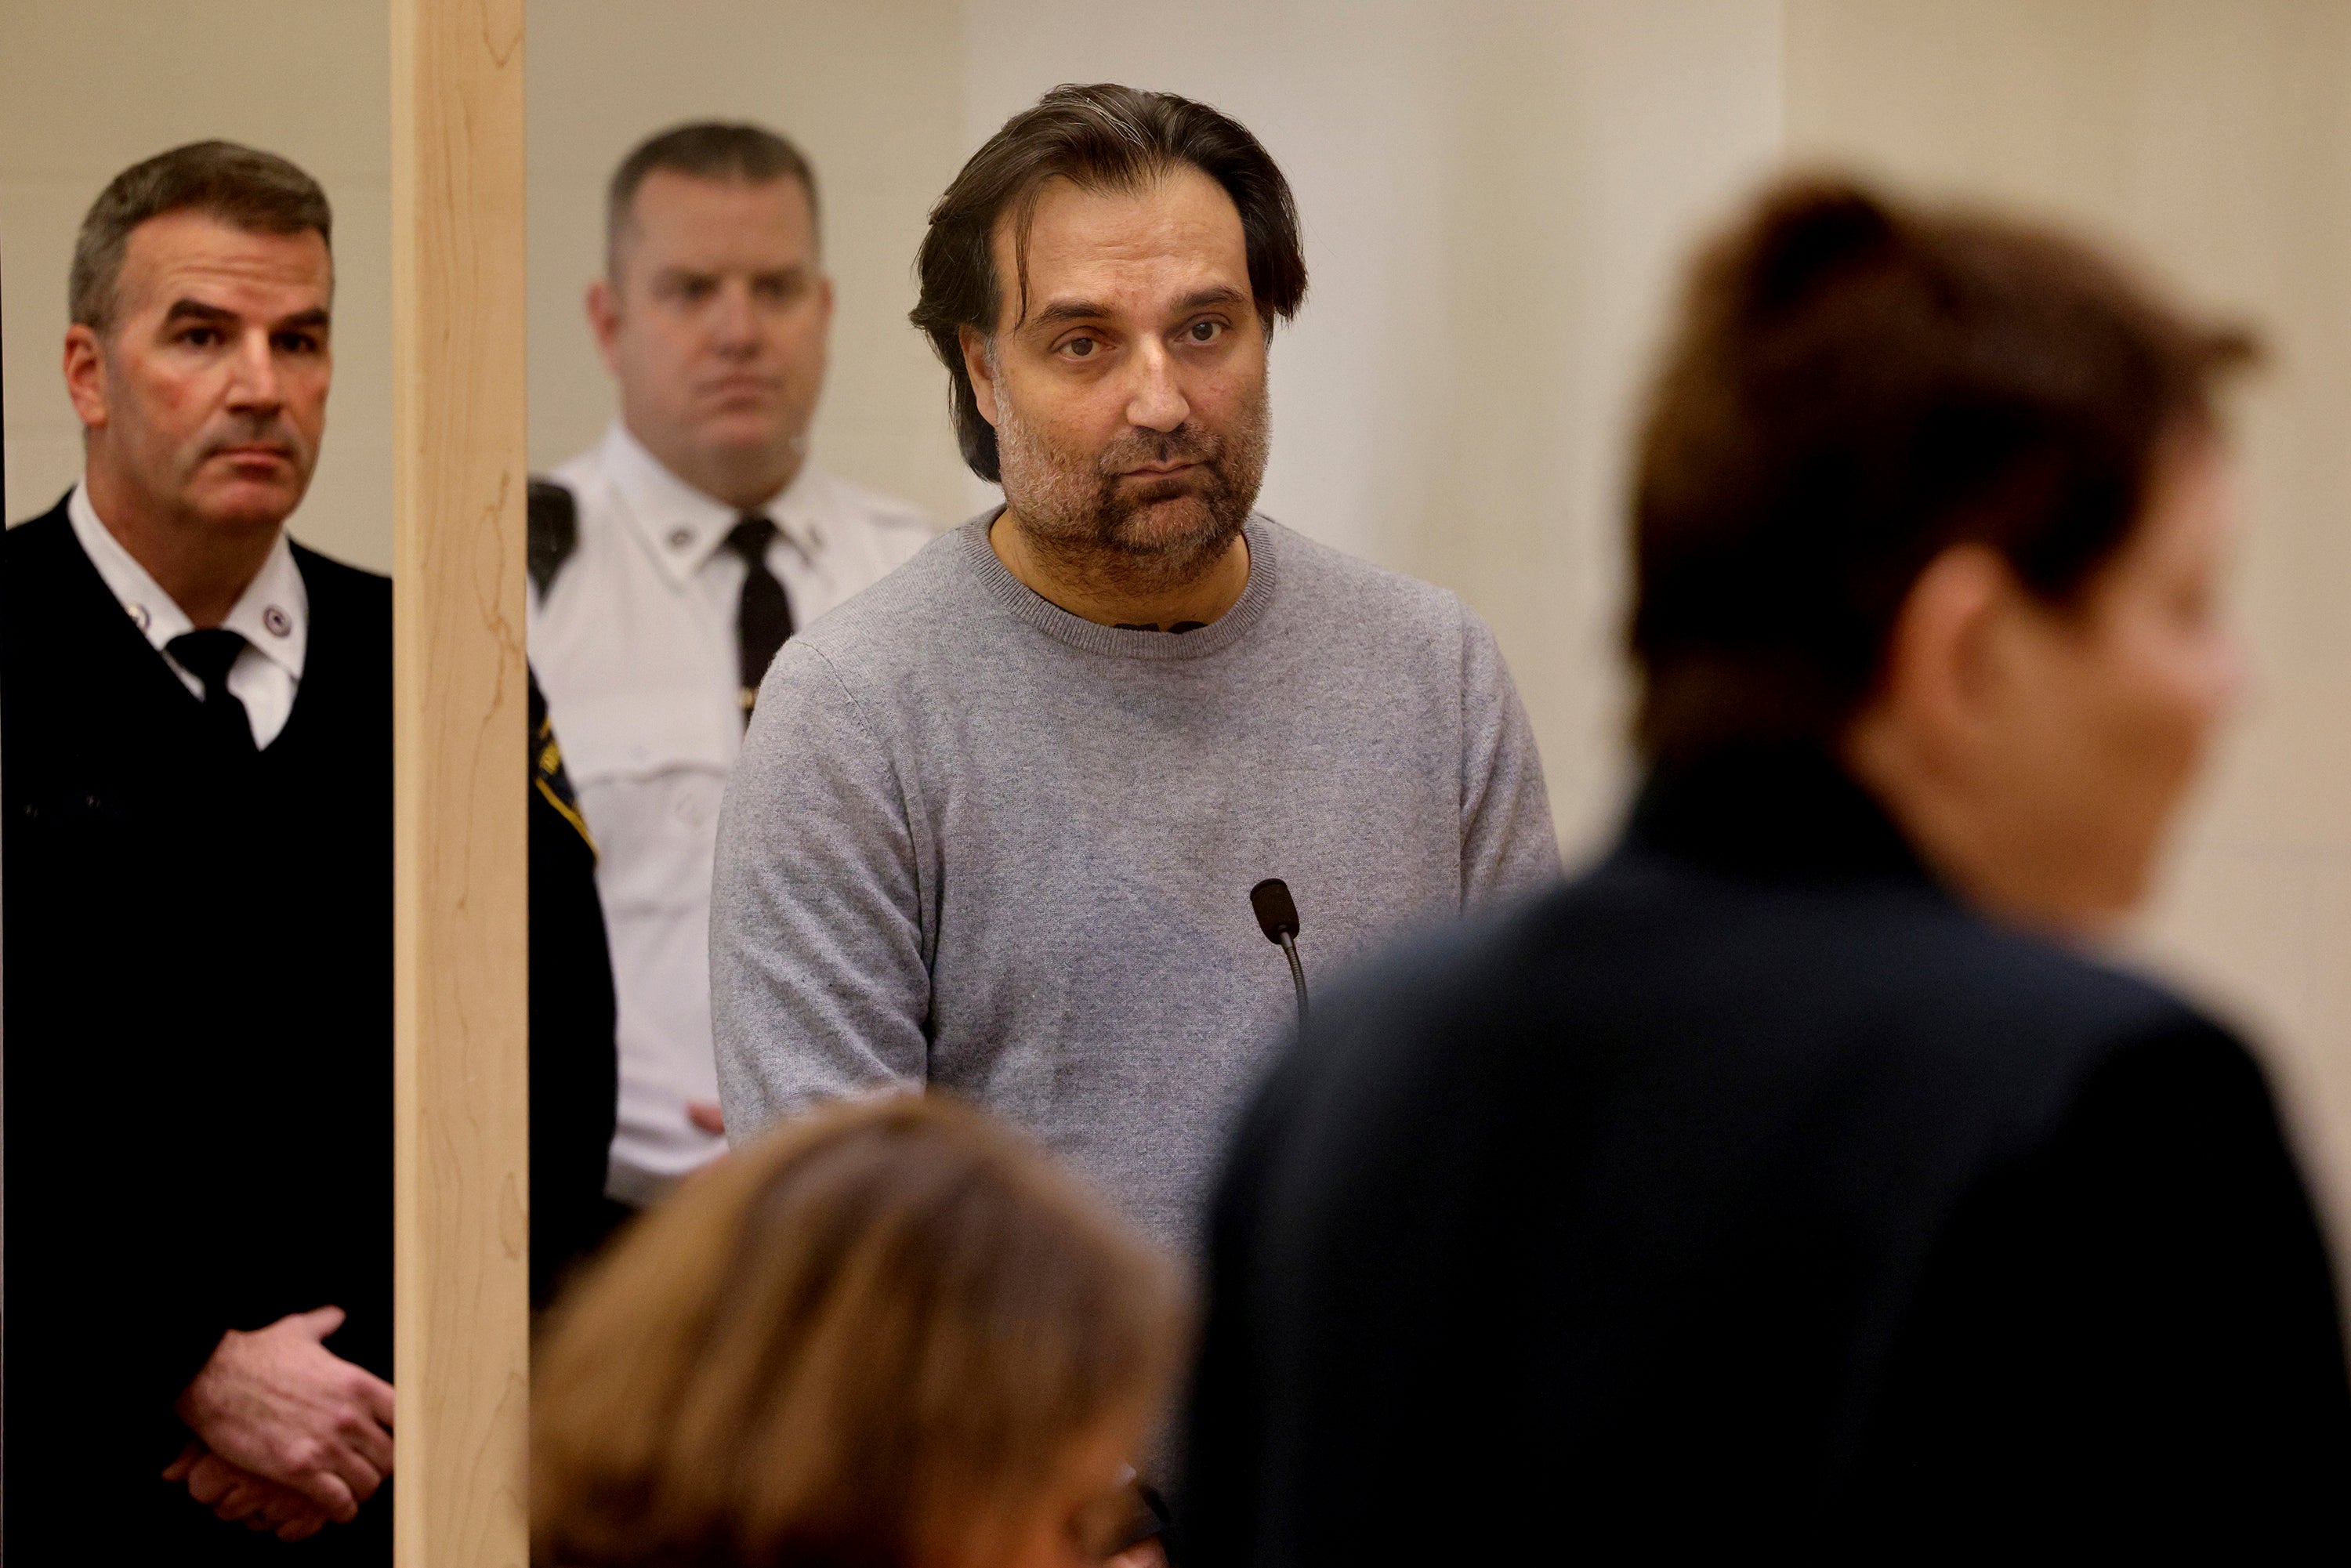 Brian Walshe, center, listens during his arraignment Wednesday, Jan. 18, 2023, at Quincy District Court, in Quincy, Mass., on a charge of murdering his wife Ana Walshe. Not guilty pleas were entered on behalf of Walshe, 47.